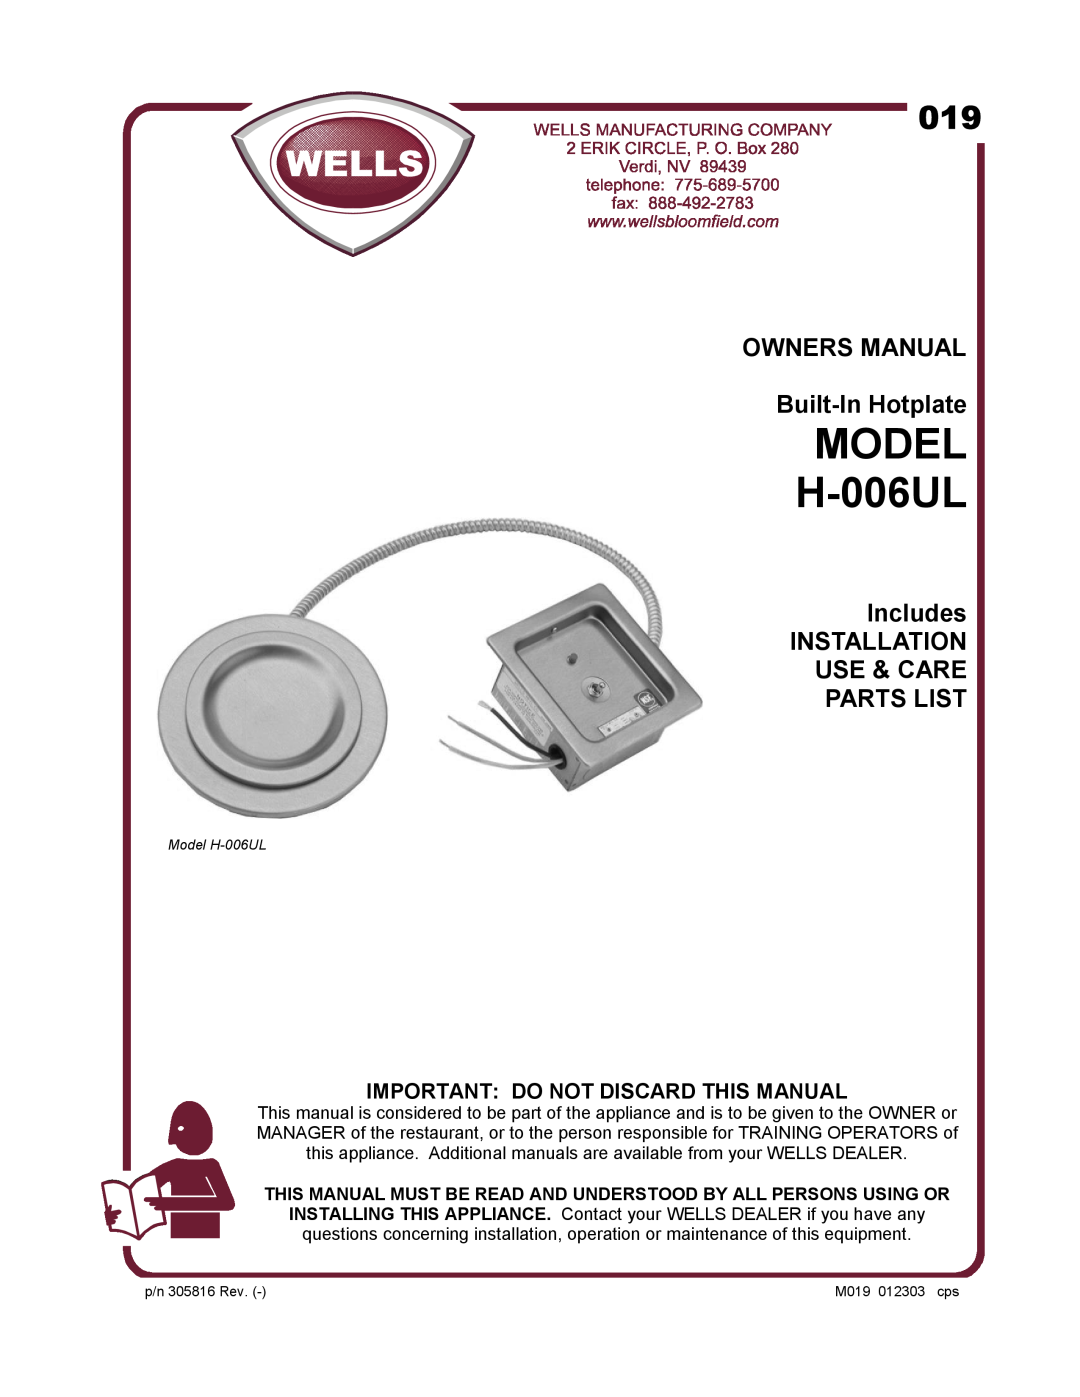 Wells H-006UL owner manual Includes INSTALLATION USE & CARE PARTS LIST, Important Do Not Discard This Manual 